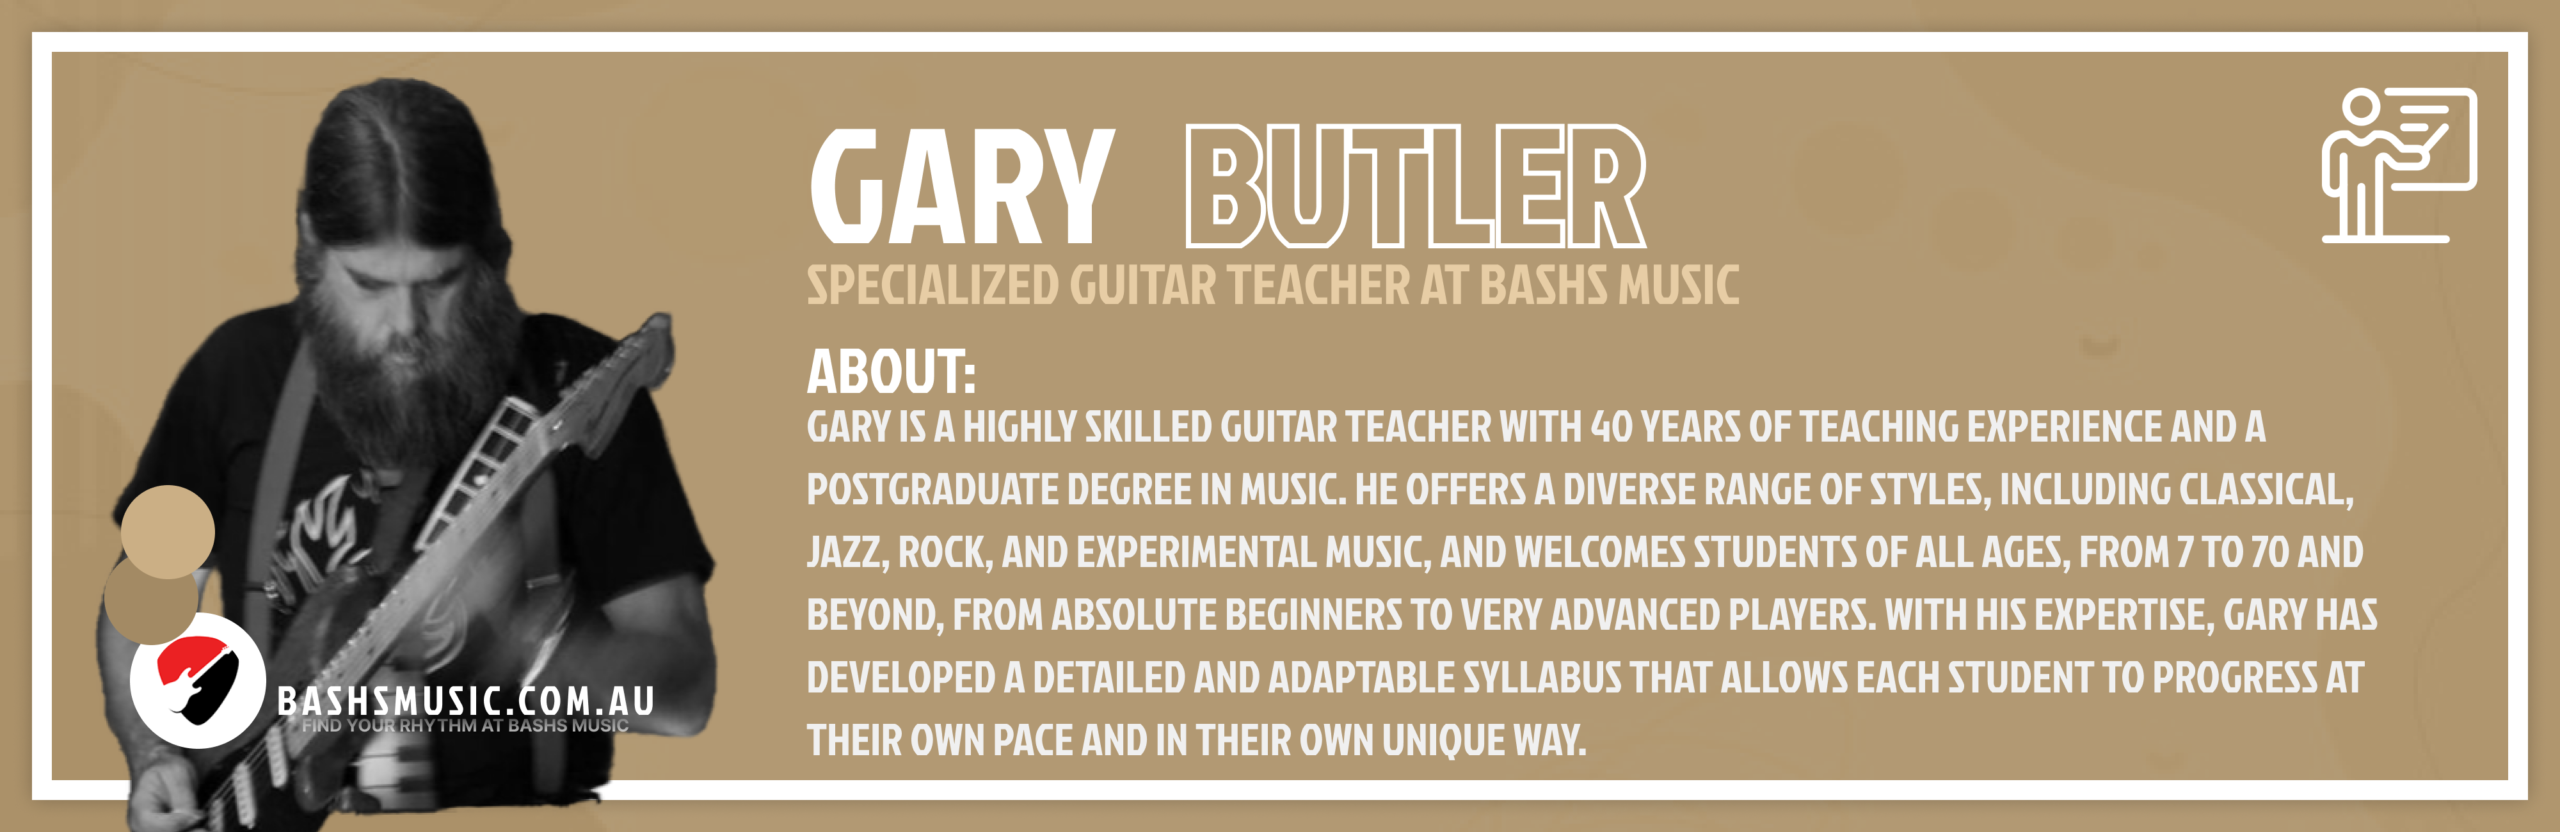 Gary Butler.
Specialized Guitar Teacher At Bashs Music.
Gary is a highly skilled guitar teacher with 40 years of teaching experience and a postgraduate degree in music. He offers a diverse range of styles, including classical, jazz, rock, and experimental music, and welcomes students of all ages, from 7 to 70 and beyond, from absolute beginners to very advanced players. With his expertise, Gary has developed a detailed and adaptable syllabus that allows each student to progress at their own pace and in their own unique way.